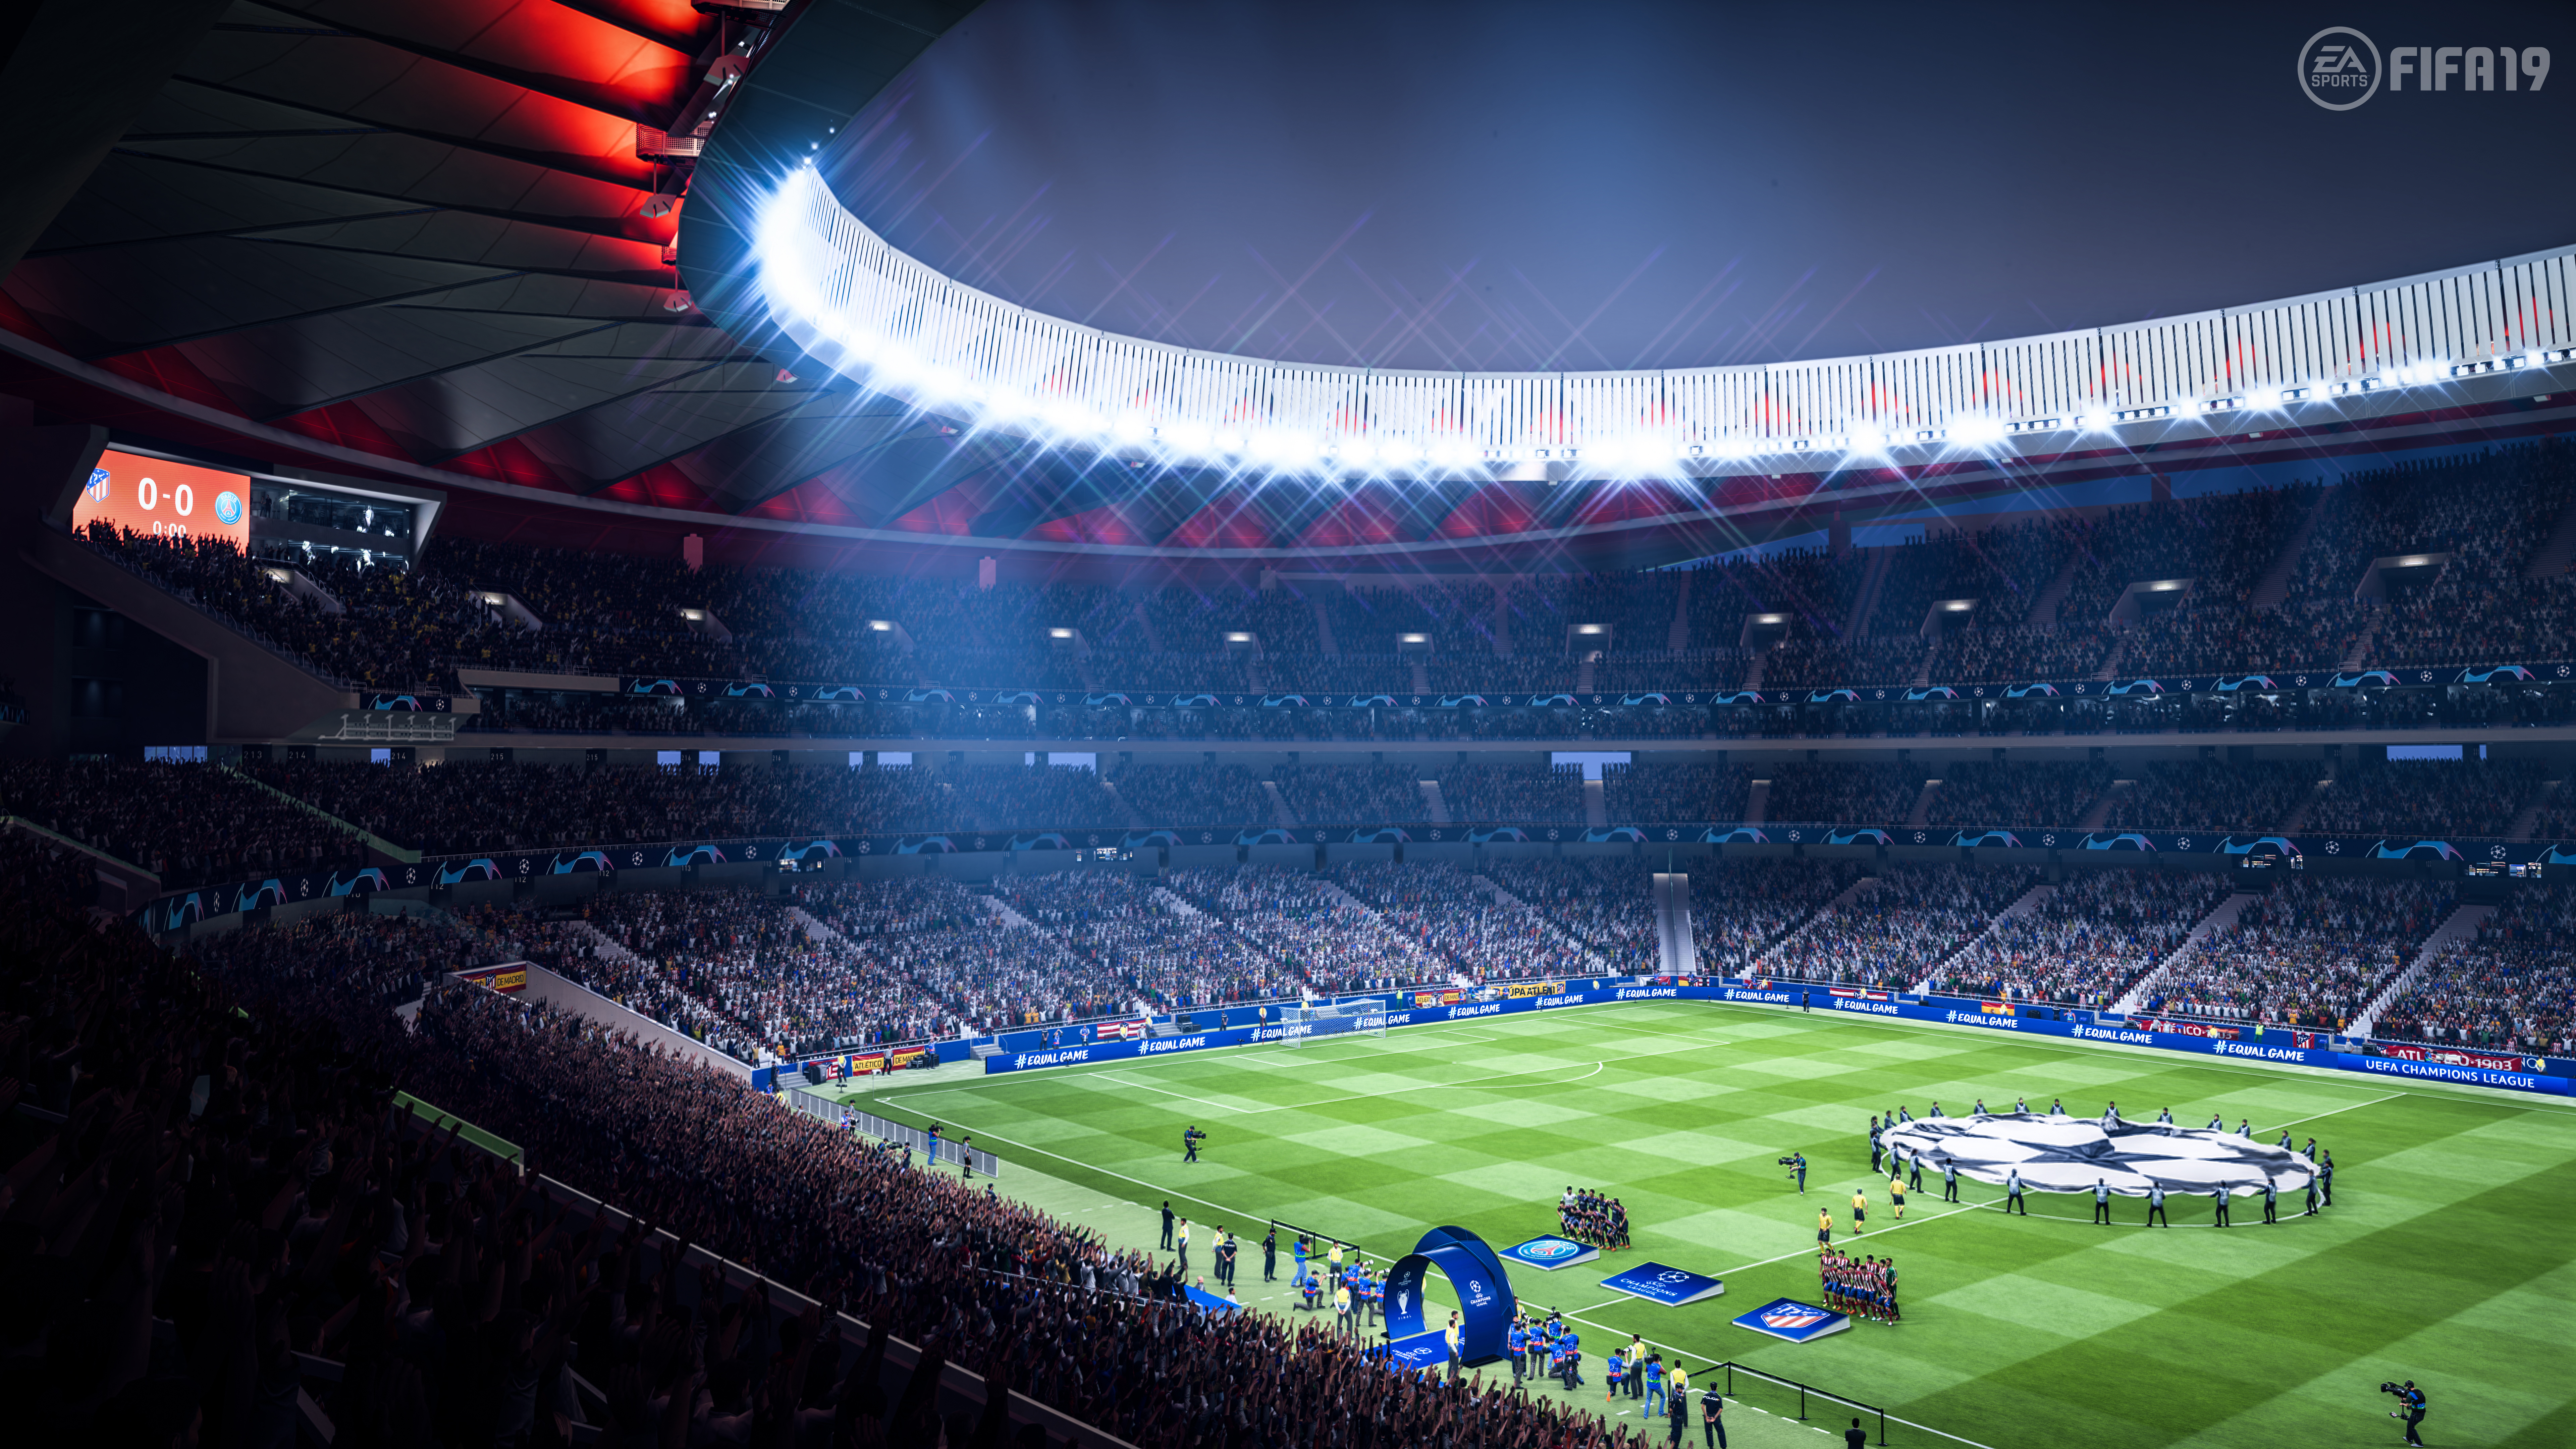 FIFA 19 Preview #4